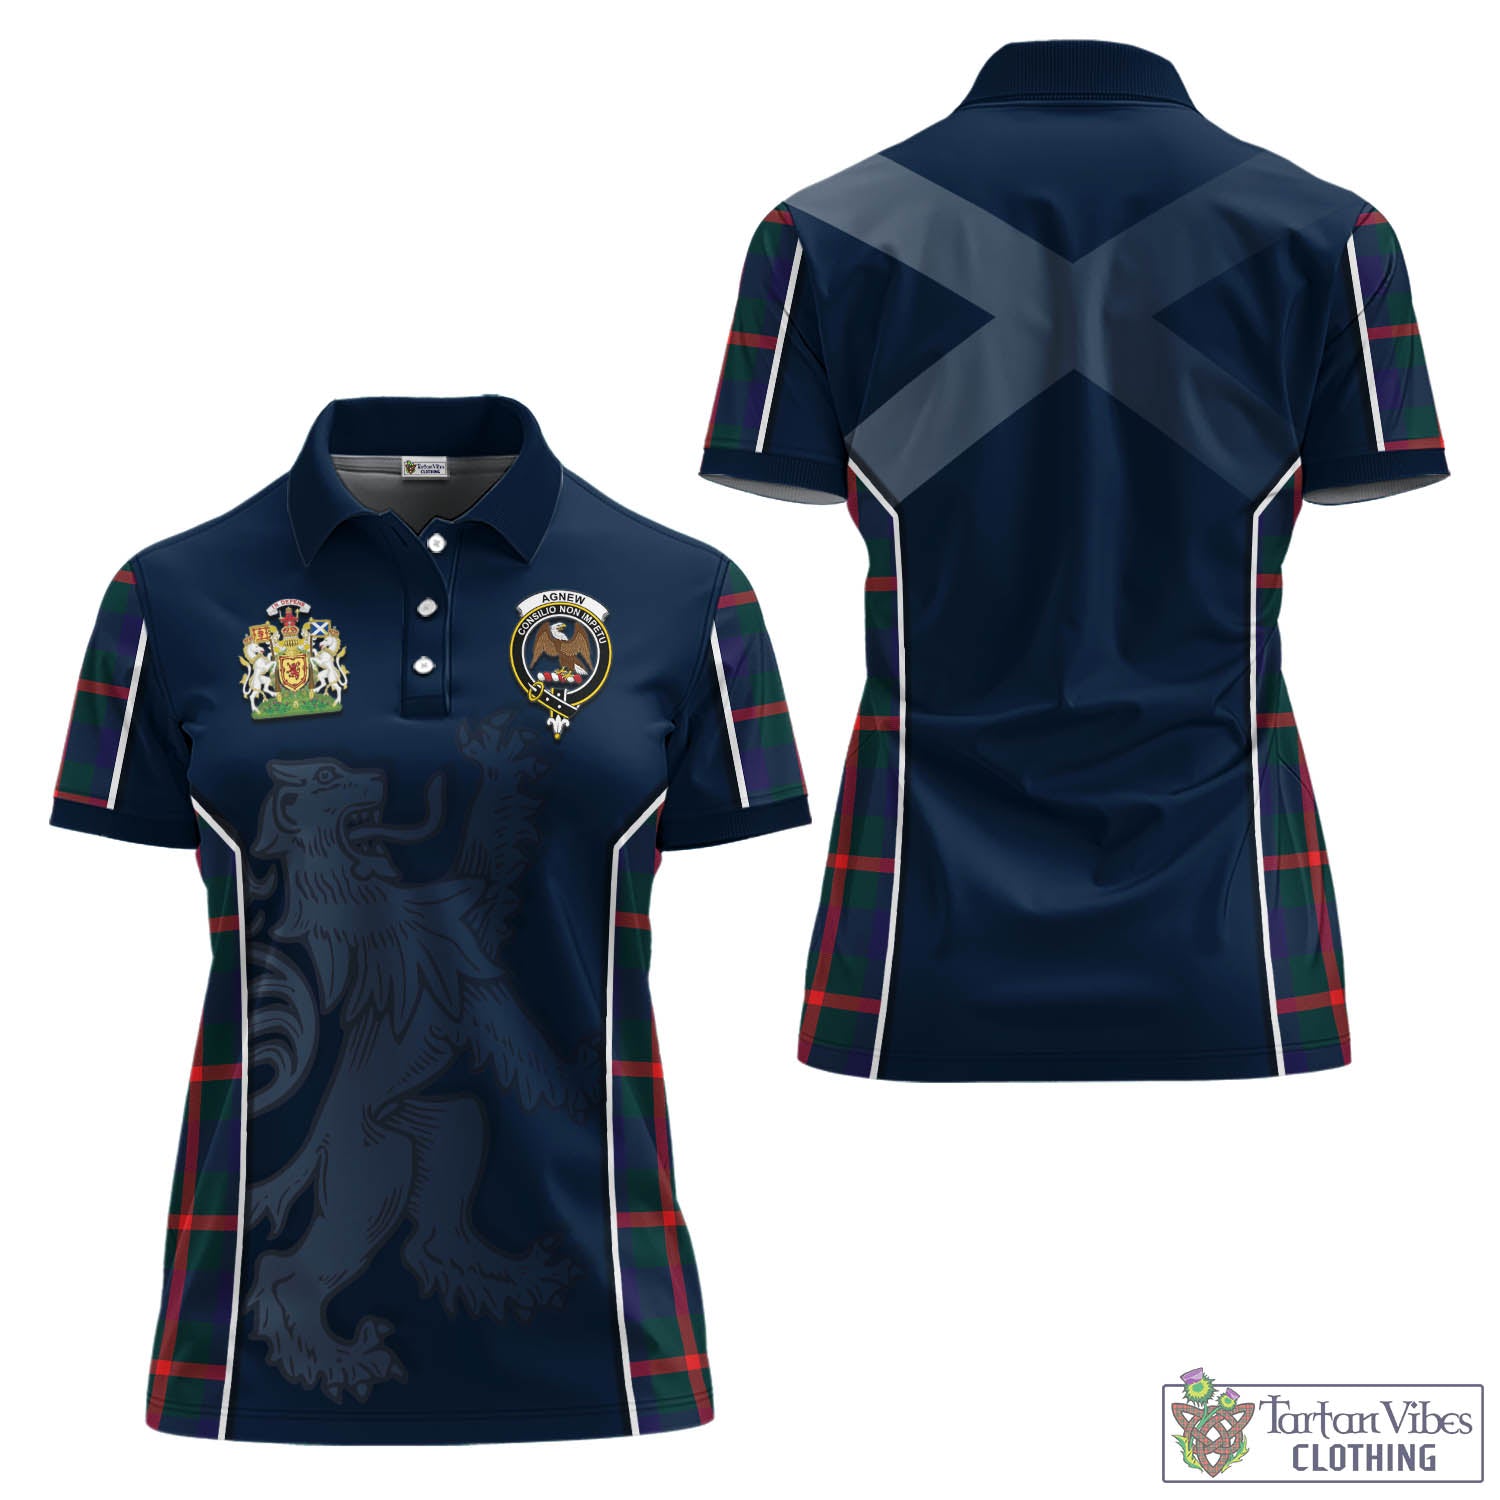 Tartan Vibes Clothing Agnew Modern Tartan Women's Polo Shirt with Family Crest and Lion Rampant Vibes Sport Style